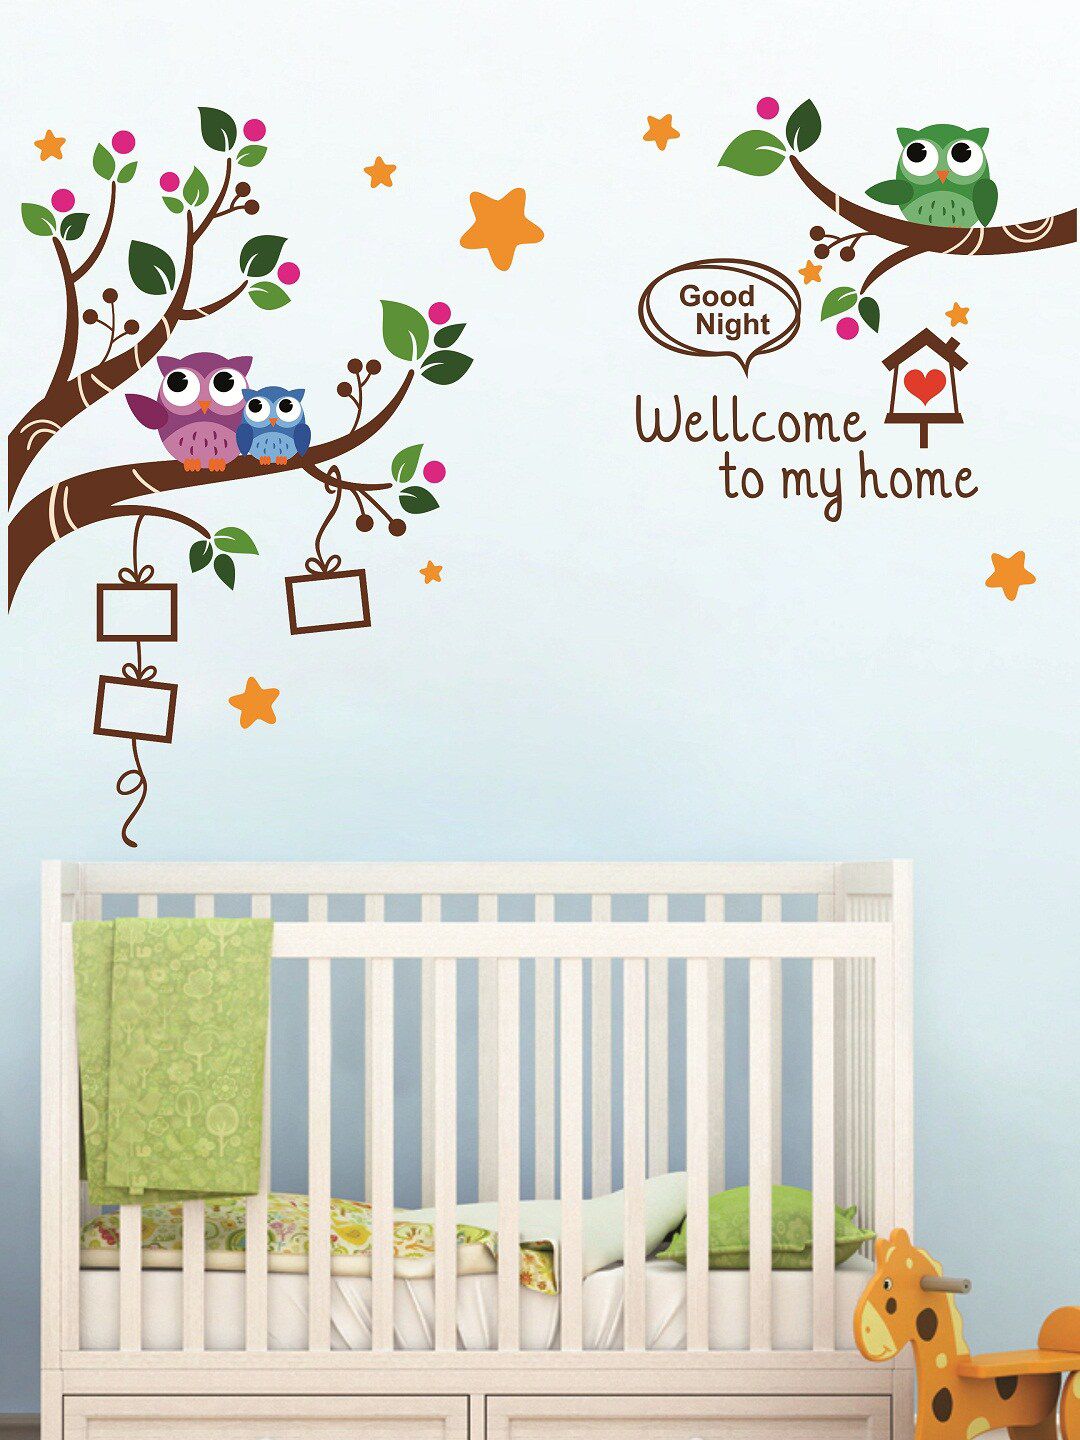 WALLSTICK Multicolored Baby Bed With Birds On Trees Large Vinyl Wall Sticker Price in India